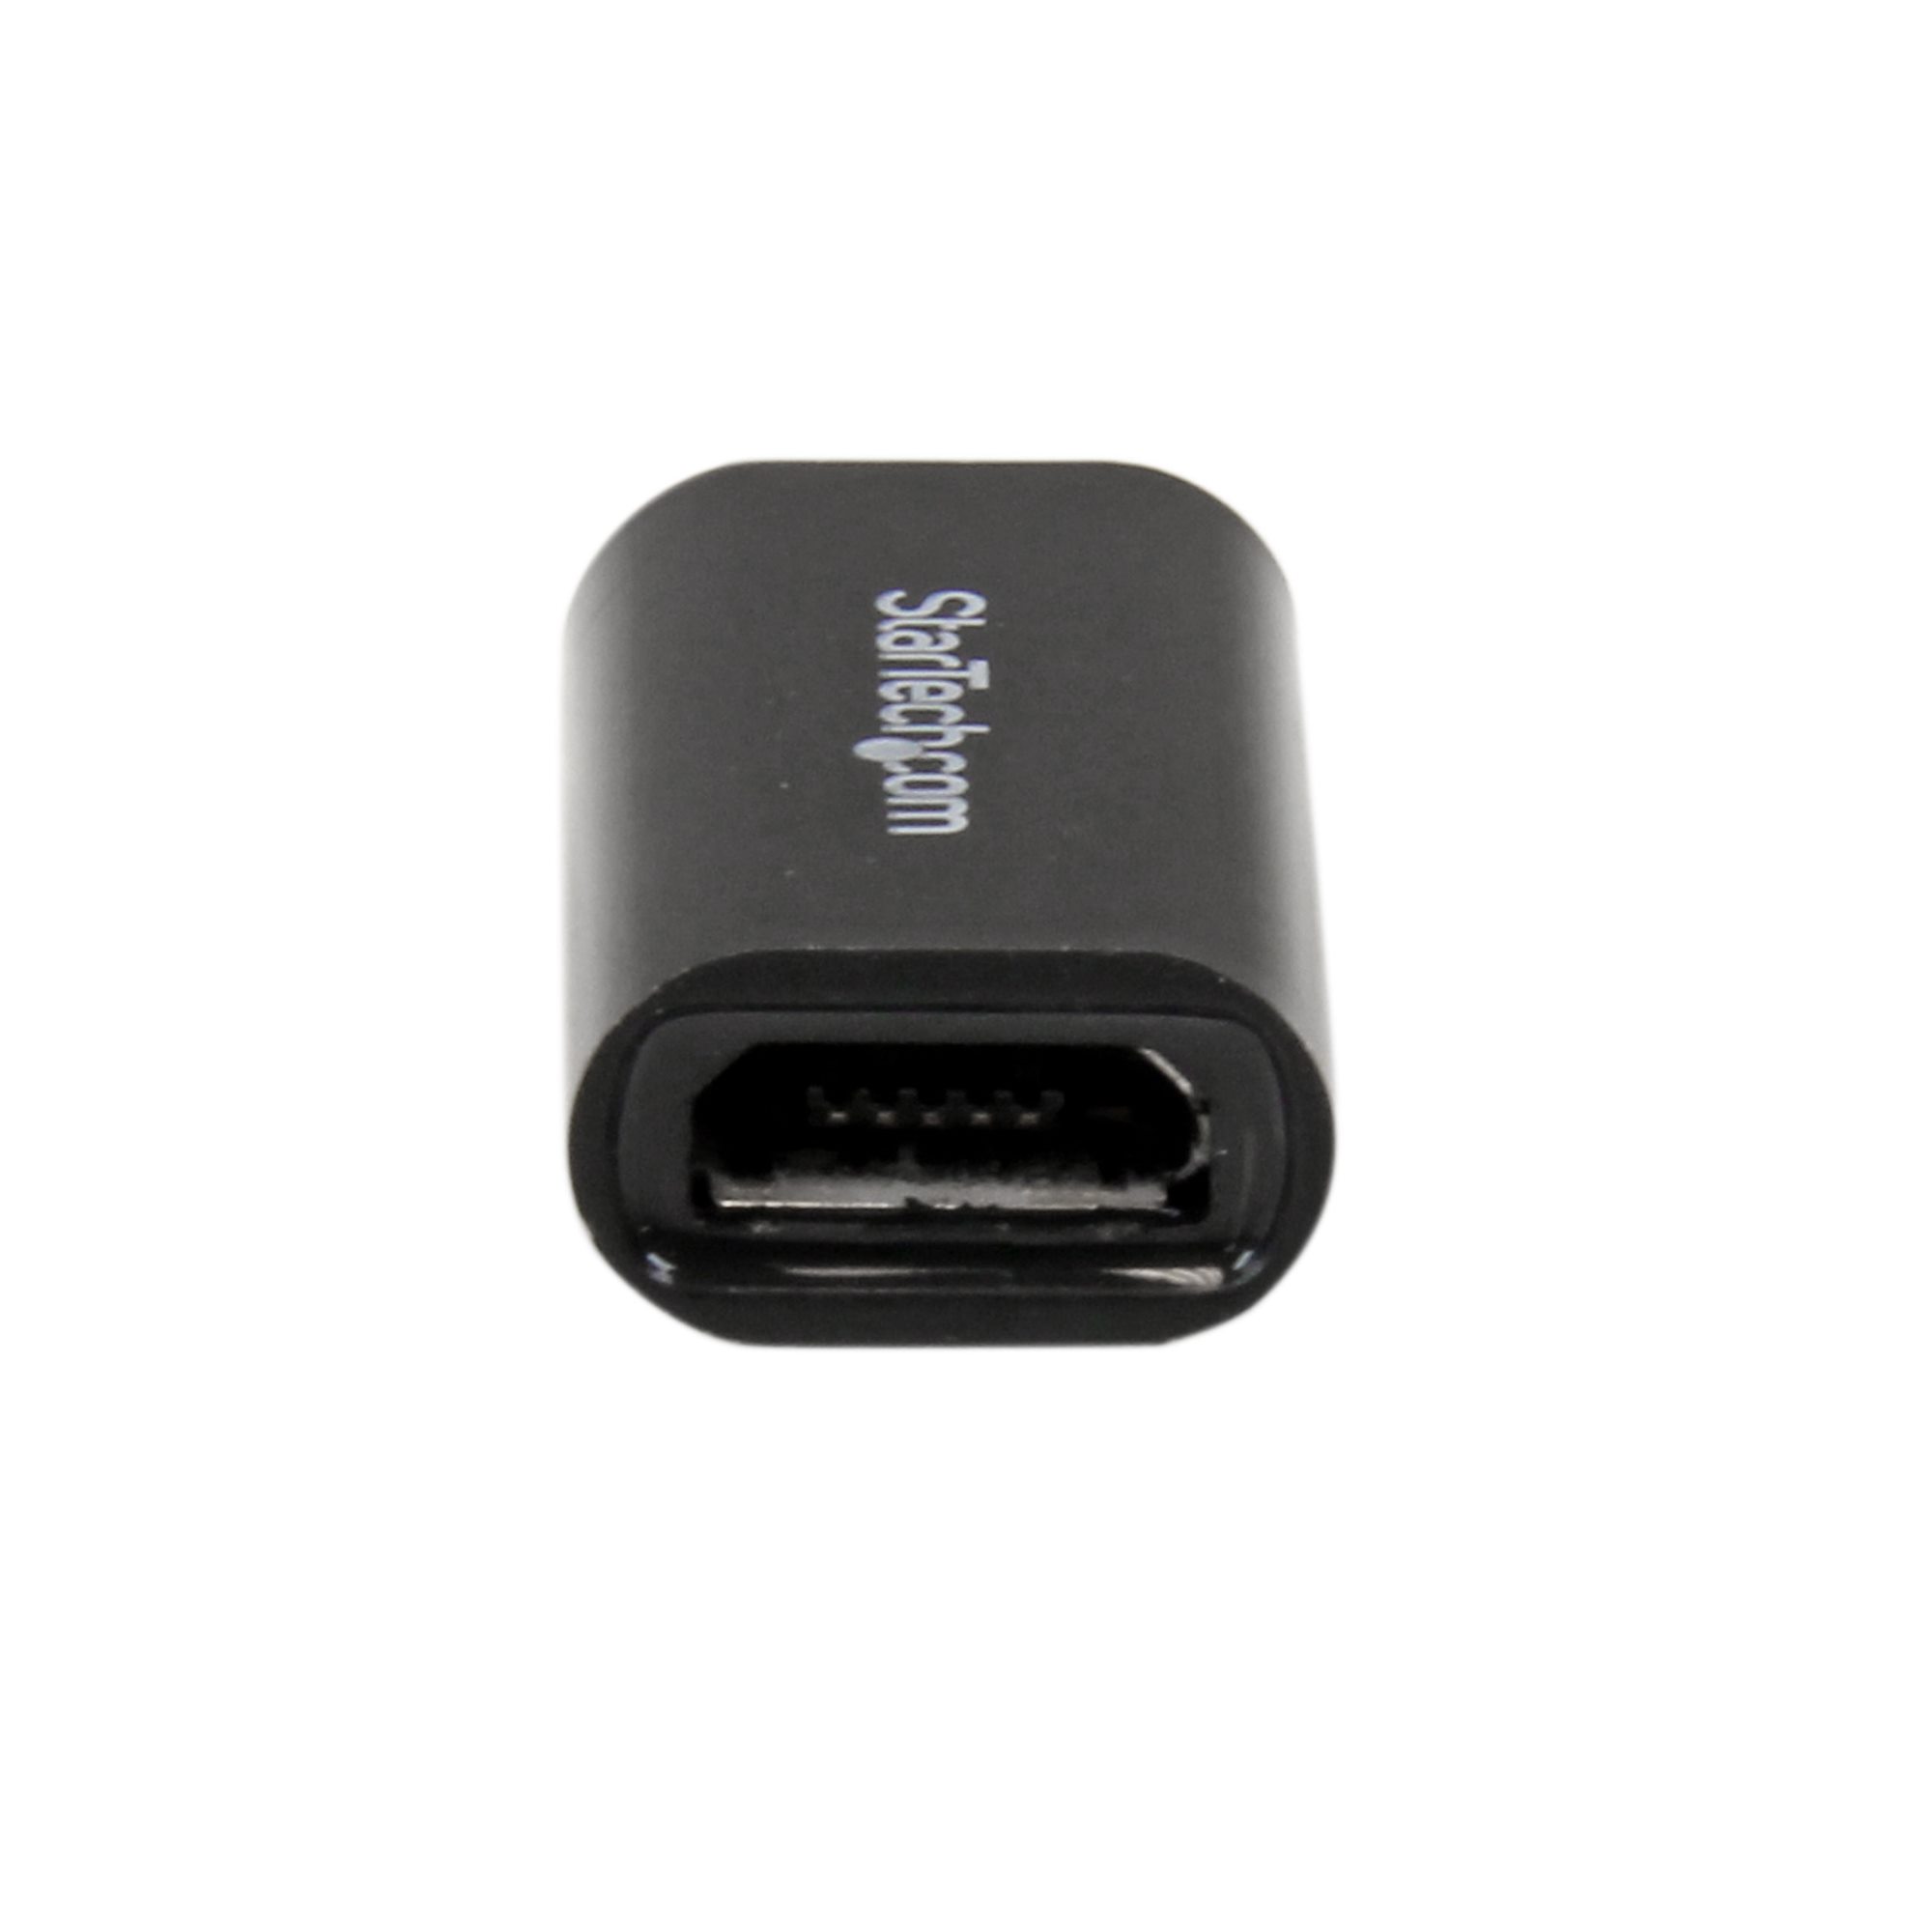 Micro USB to Lightning Adapter - Compact Micro USB to Lightning Connector  for iPhone / iPad / iPod - Apple MFi Certified - Black